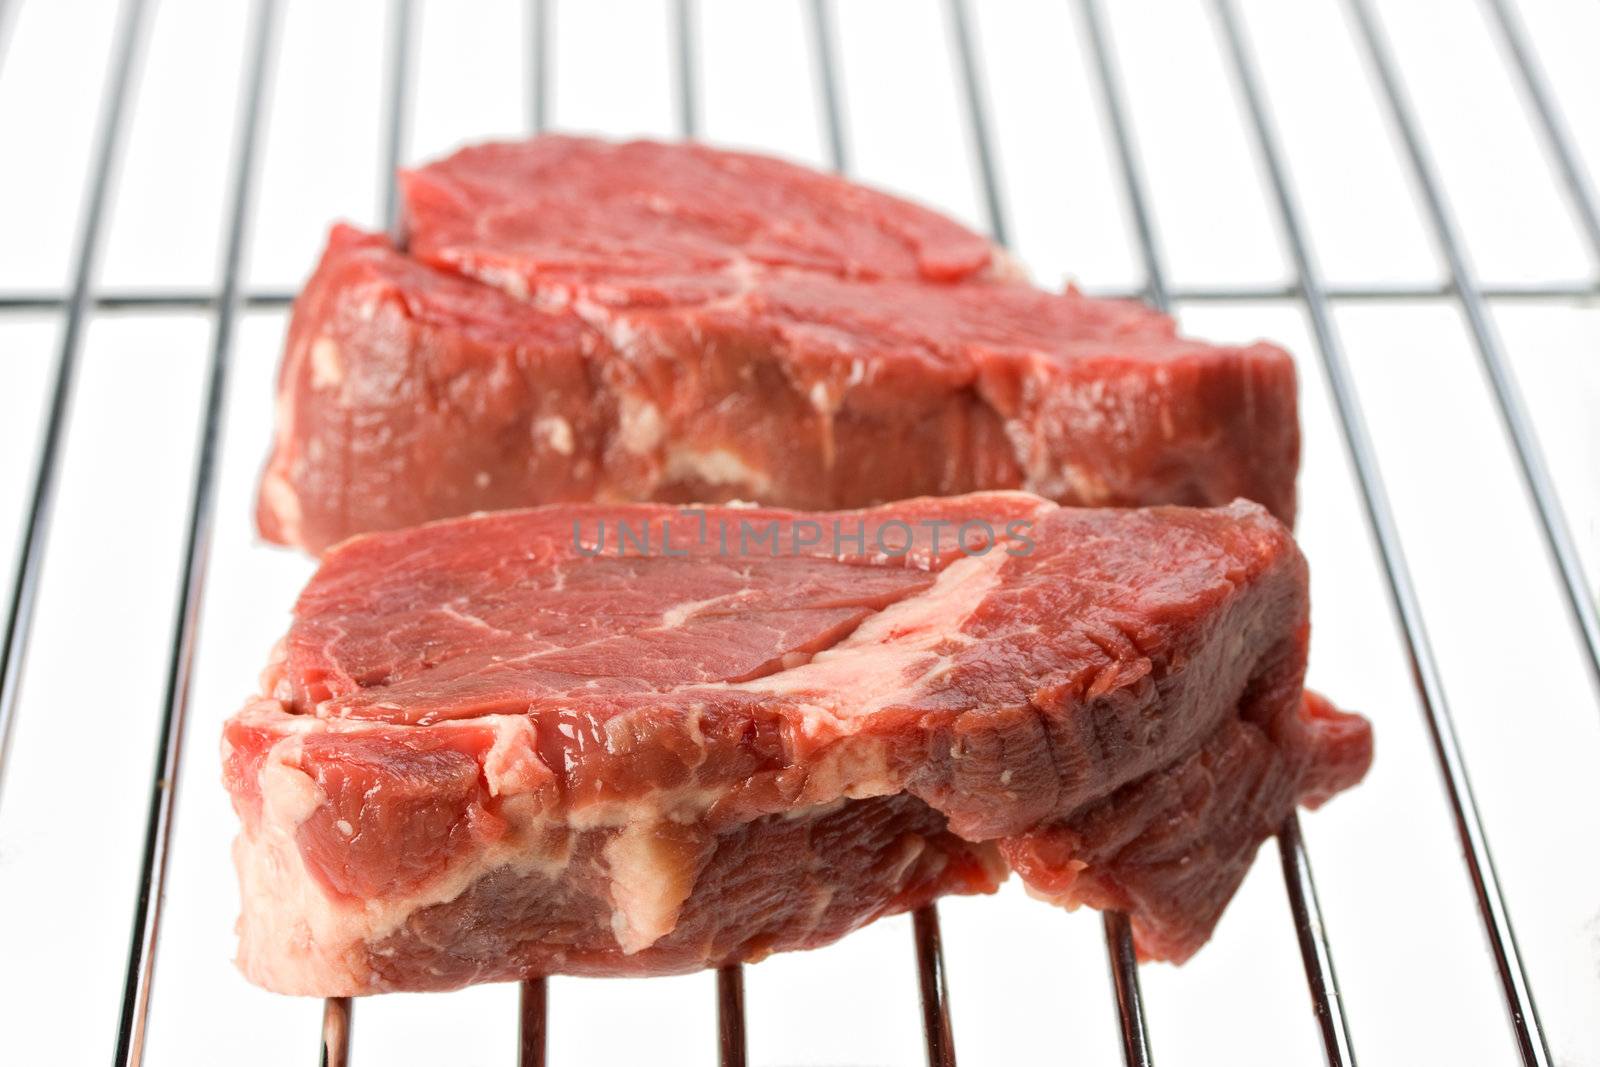 raw steak on a grill isolated on white by bernjuer